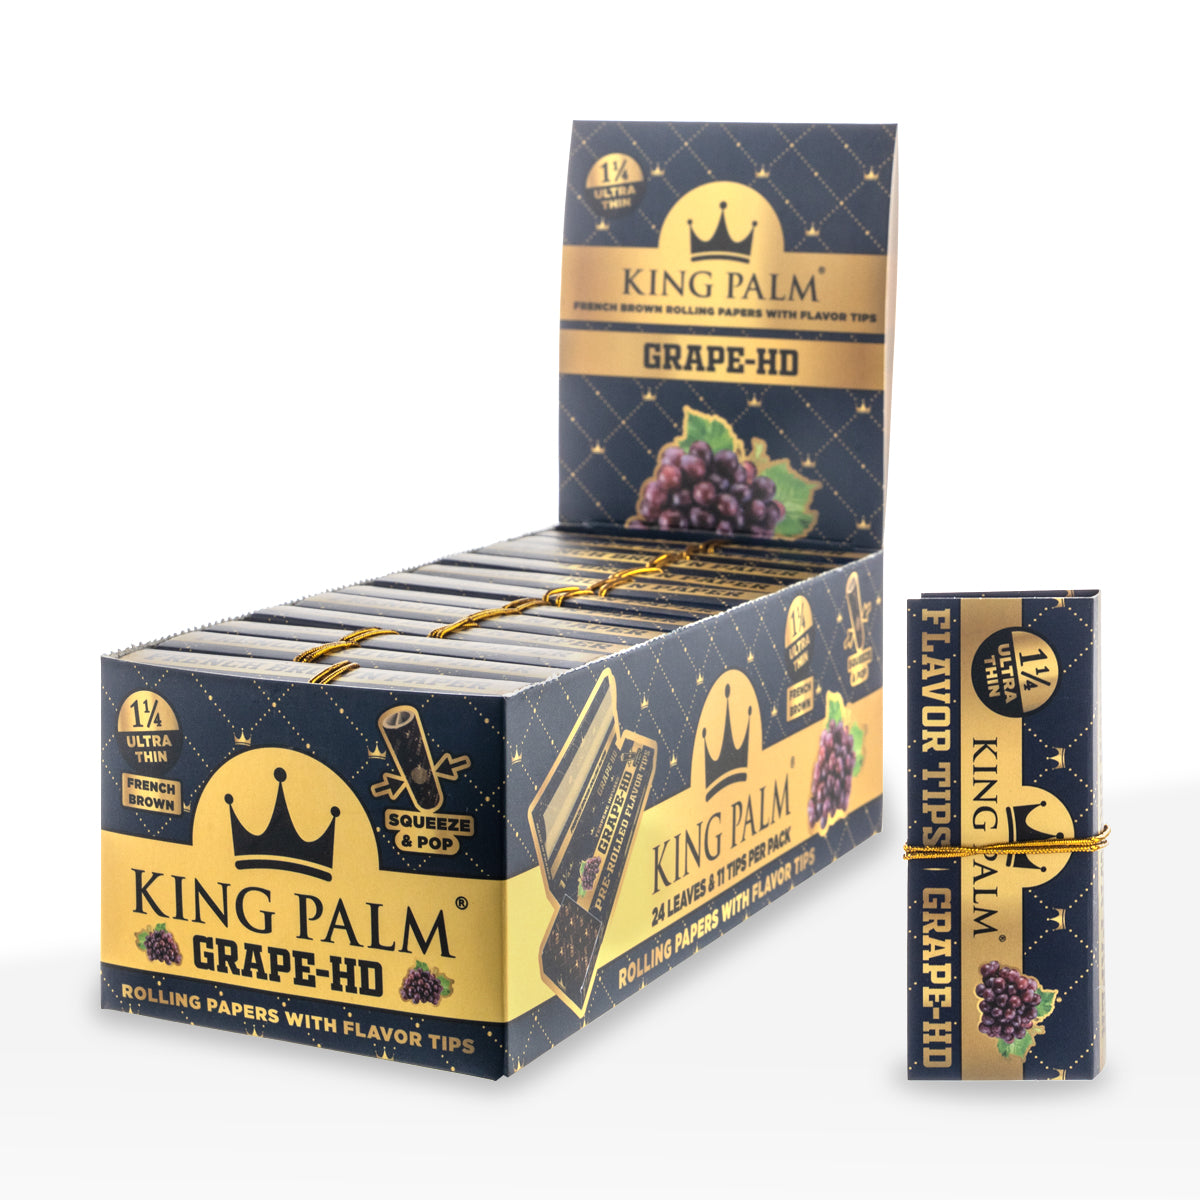 King Palm™ | French Brown 1.25" Joint Rolling Papers + Tips | 24 Pack - 24 Count - Various Flavors Rolling Papers + Tips King Palm Grape-HD  